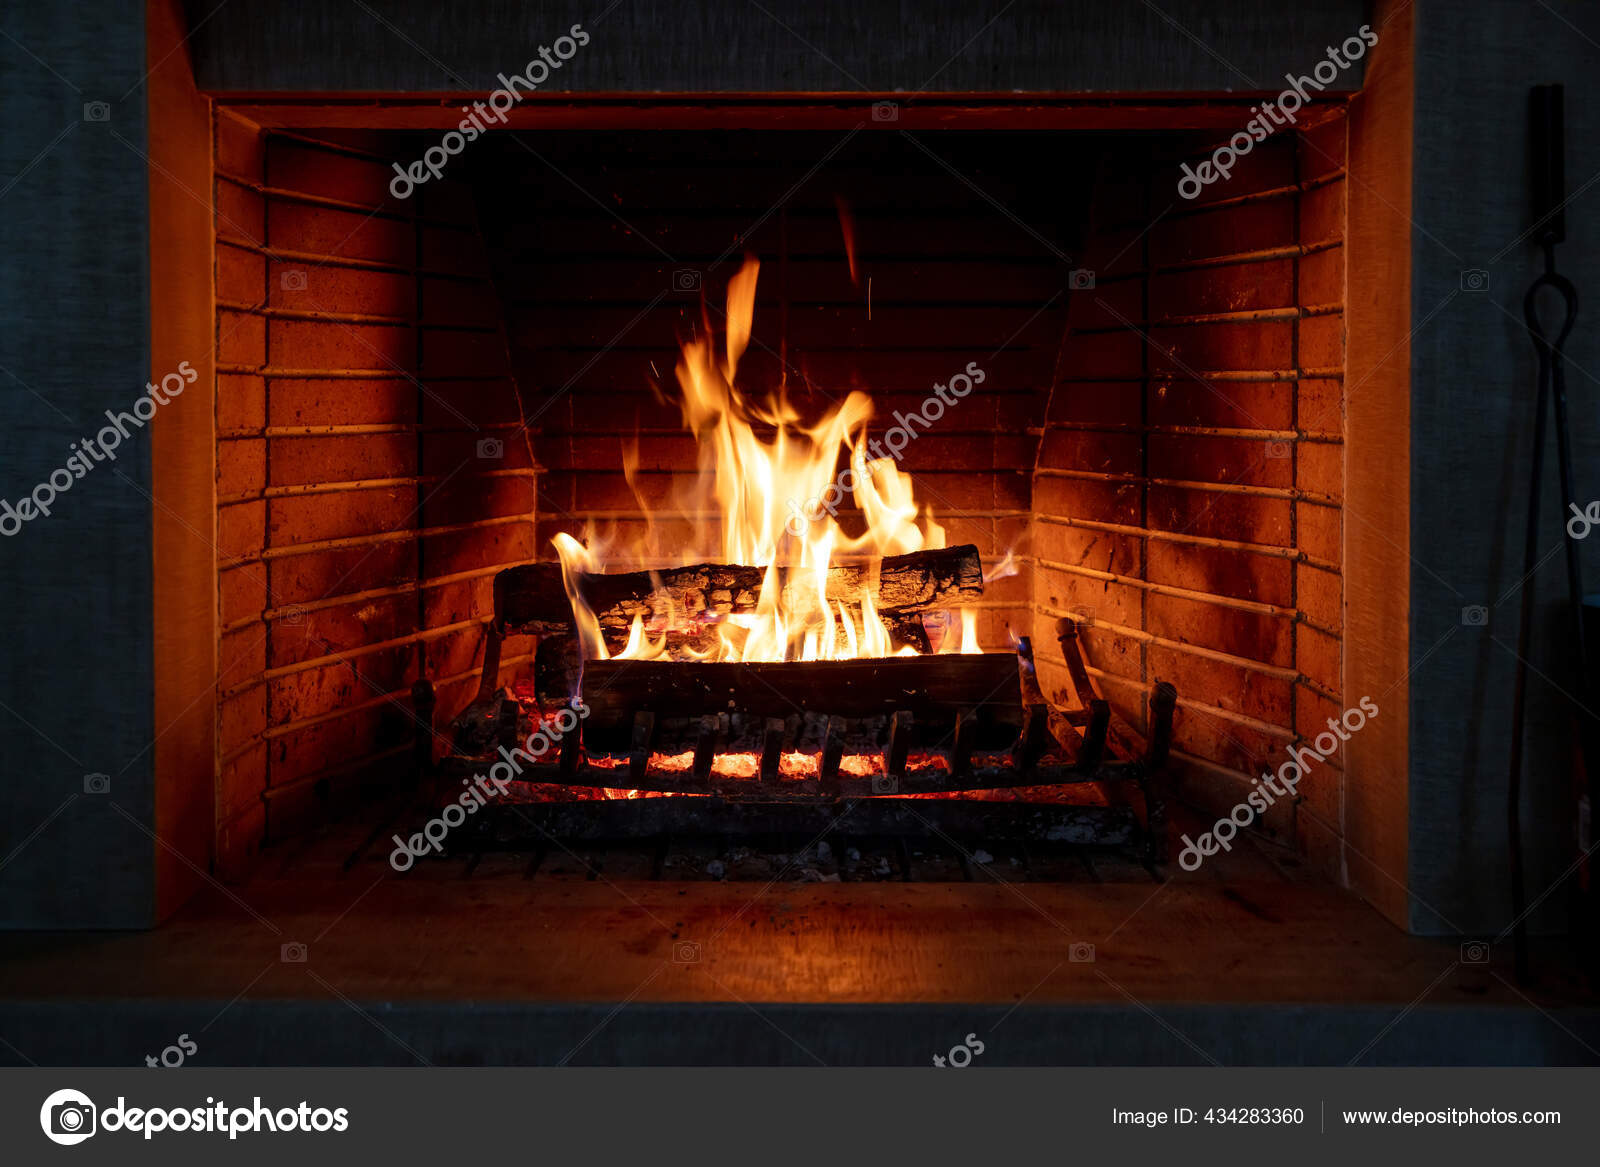 Cozy Fireplace With A Wood Burning Stove Stock Photo - Download